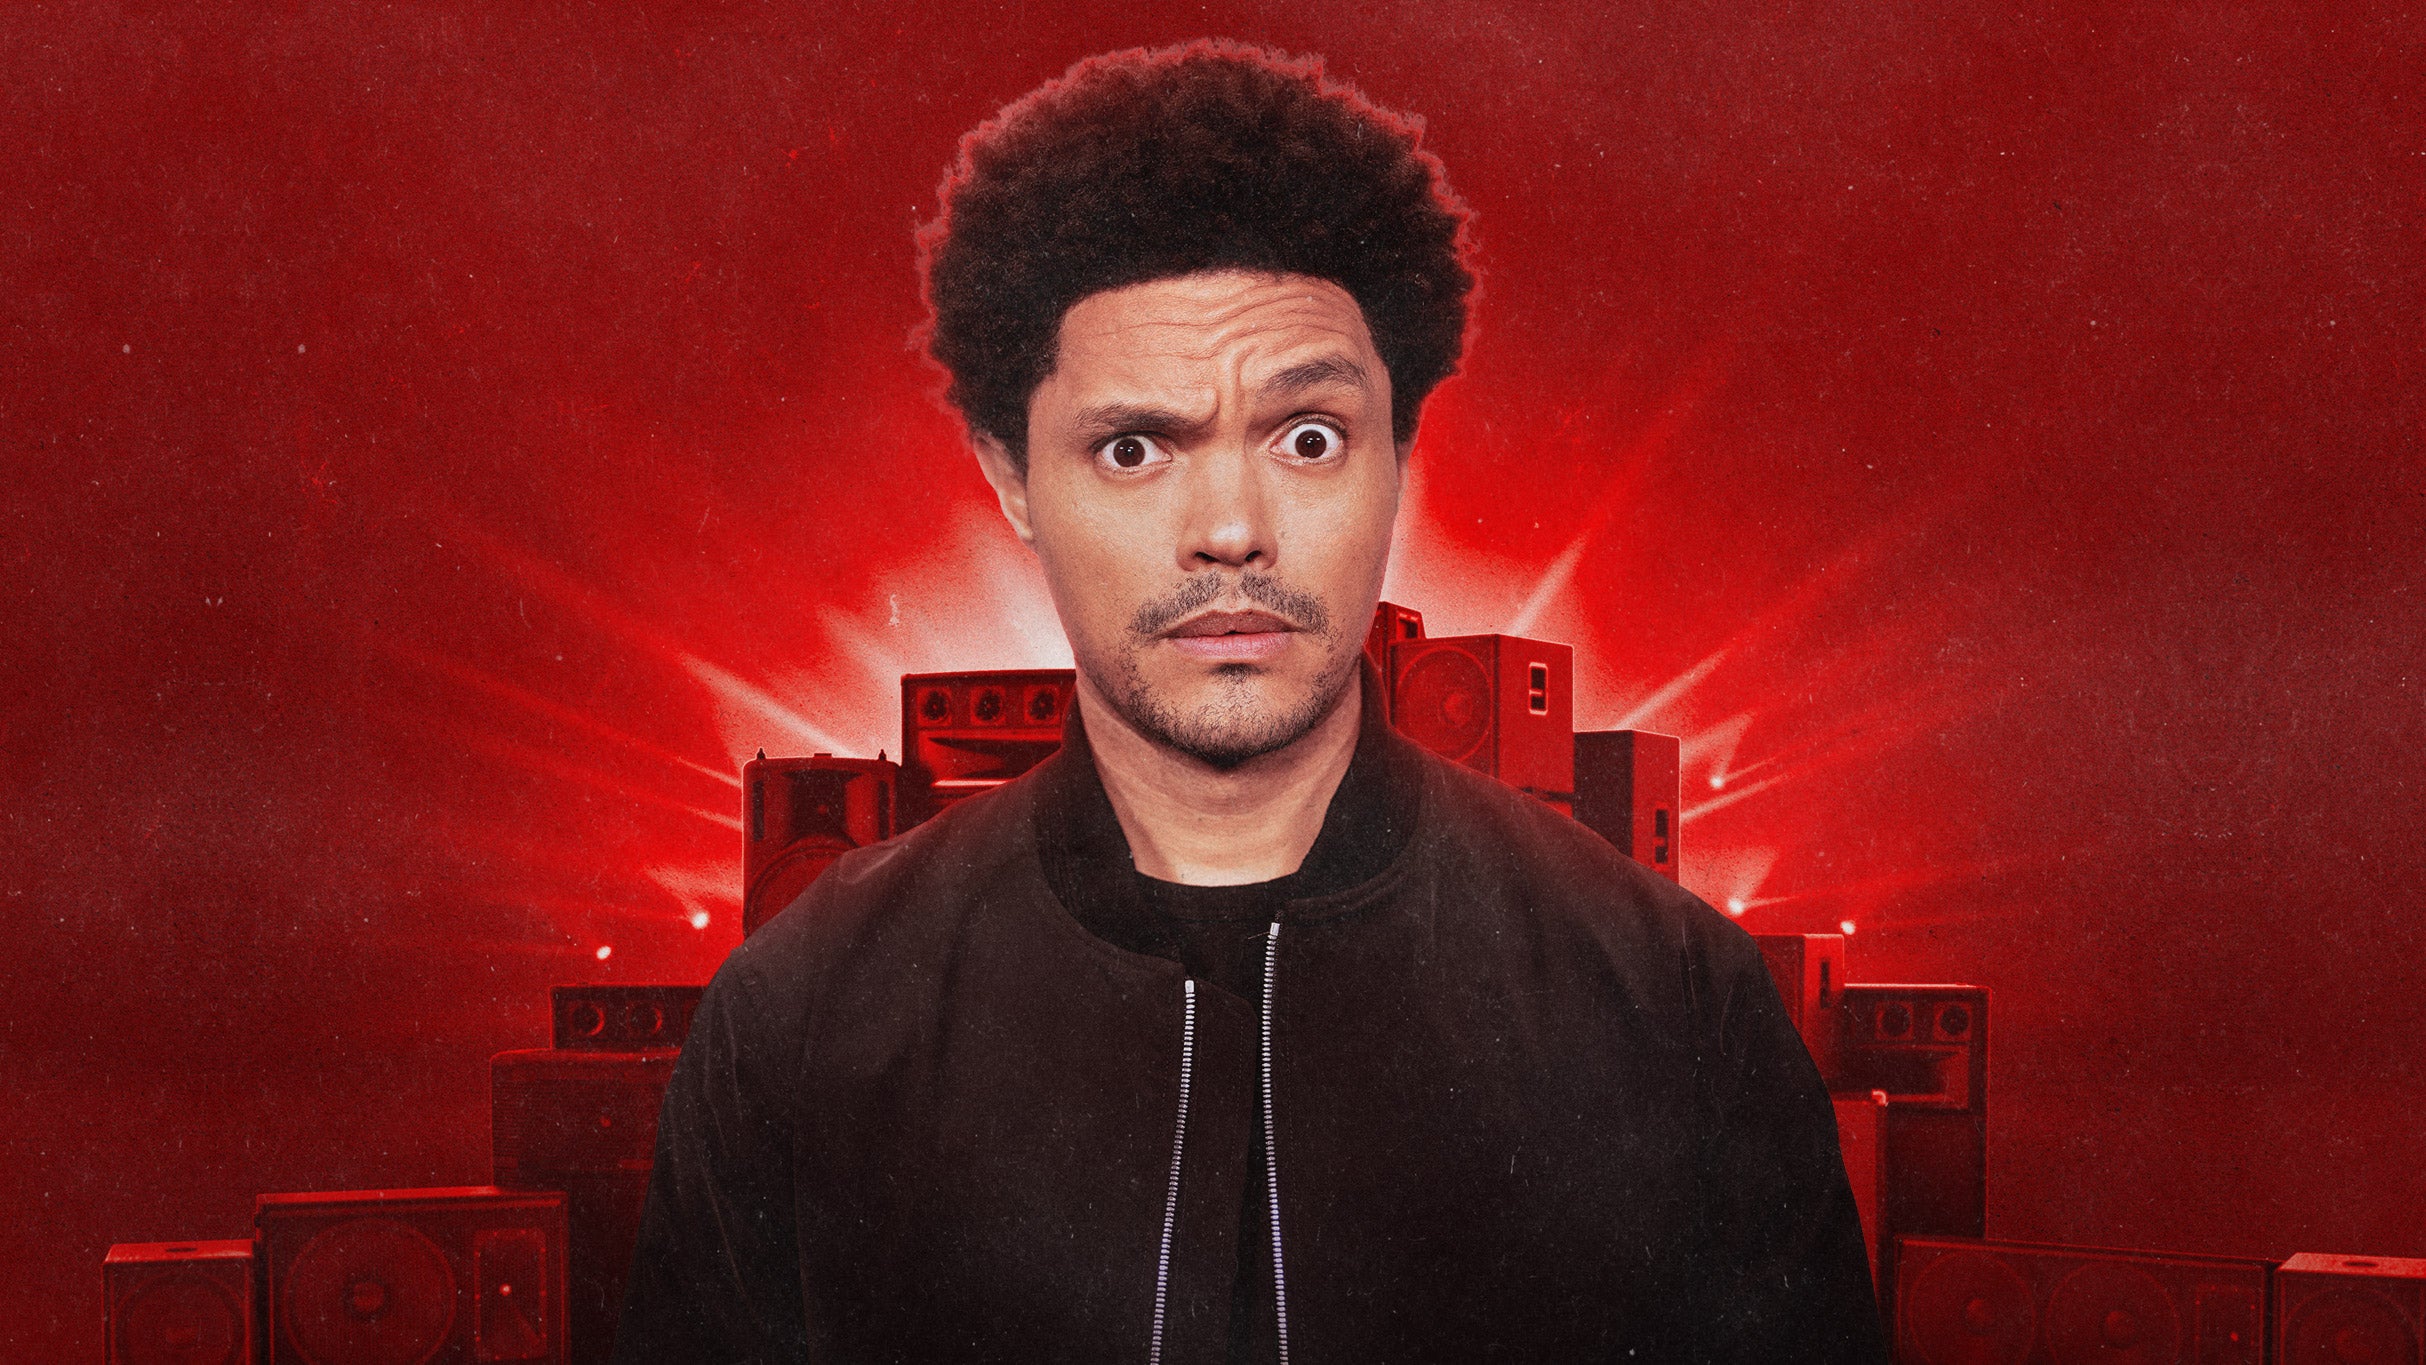 Trevor Noah: Off The Record pre-sale code for approved tickets in Minneapolis